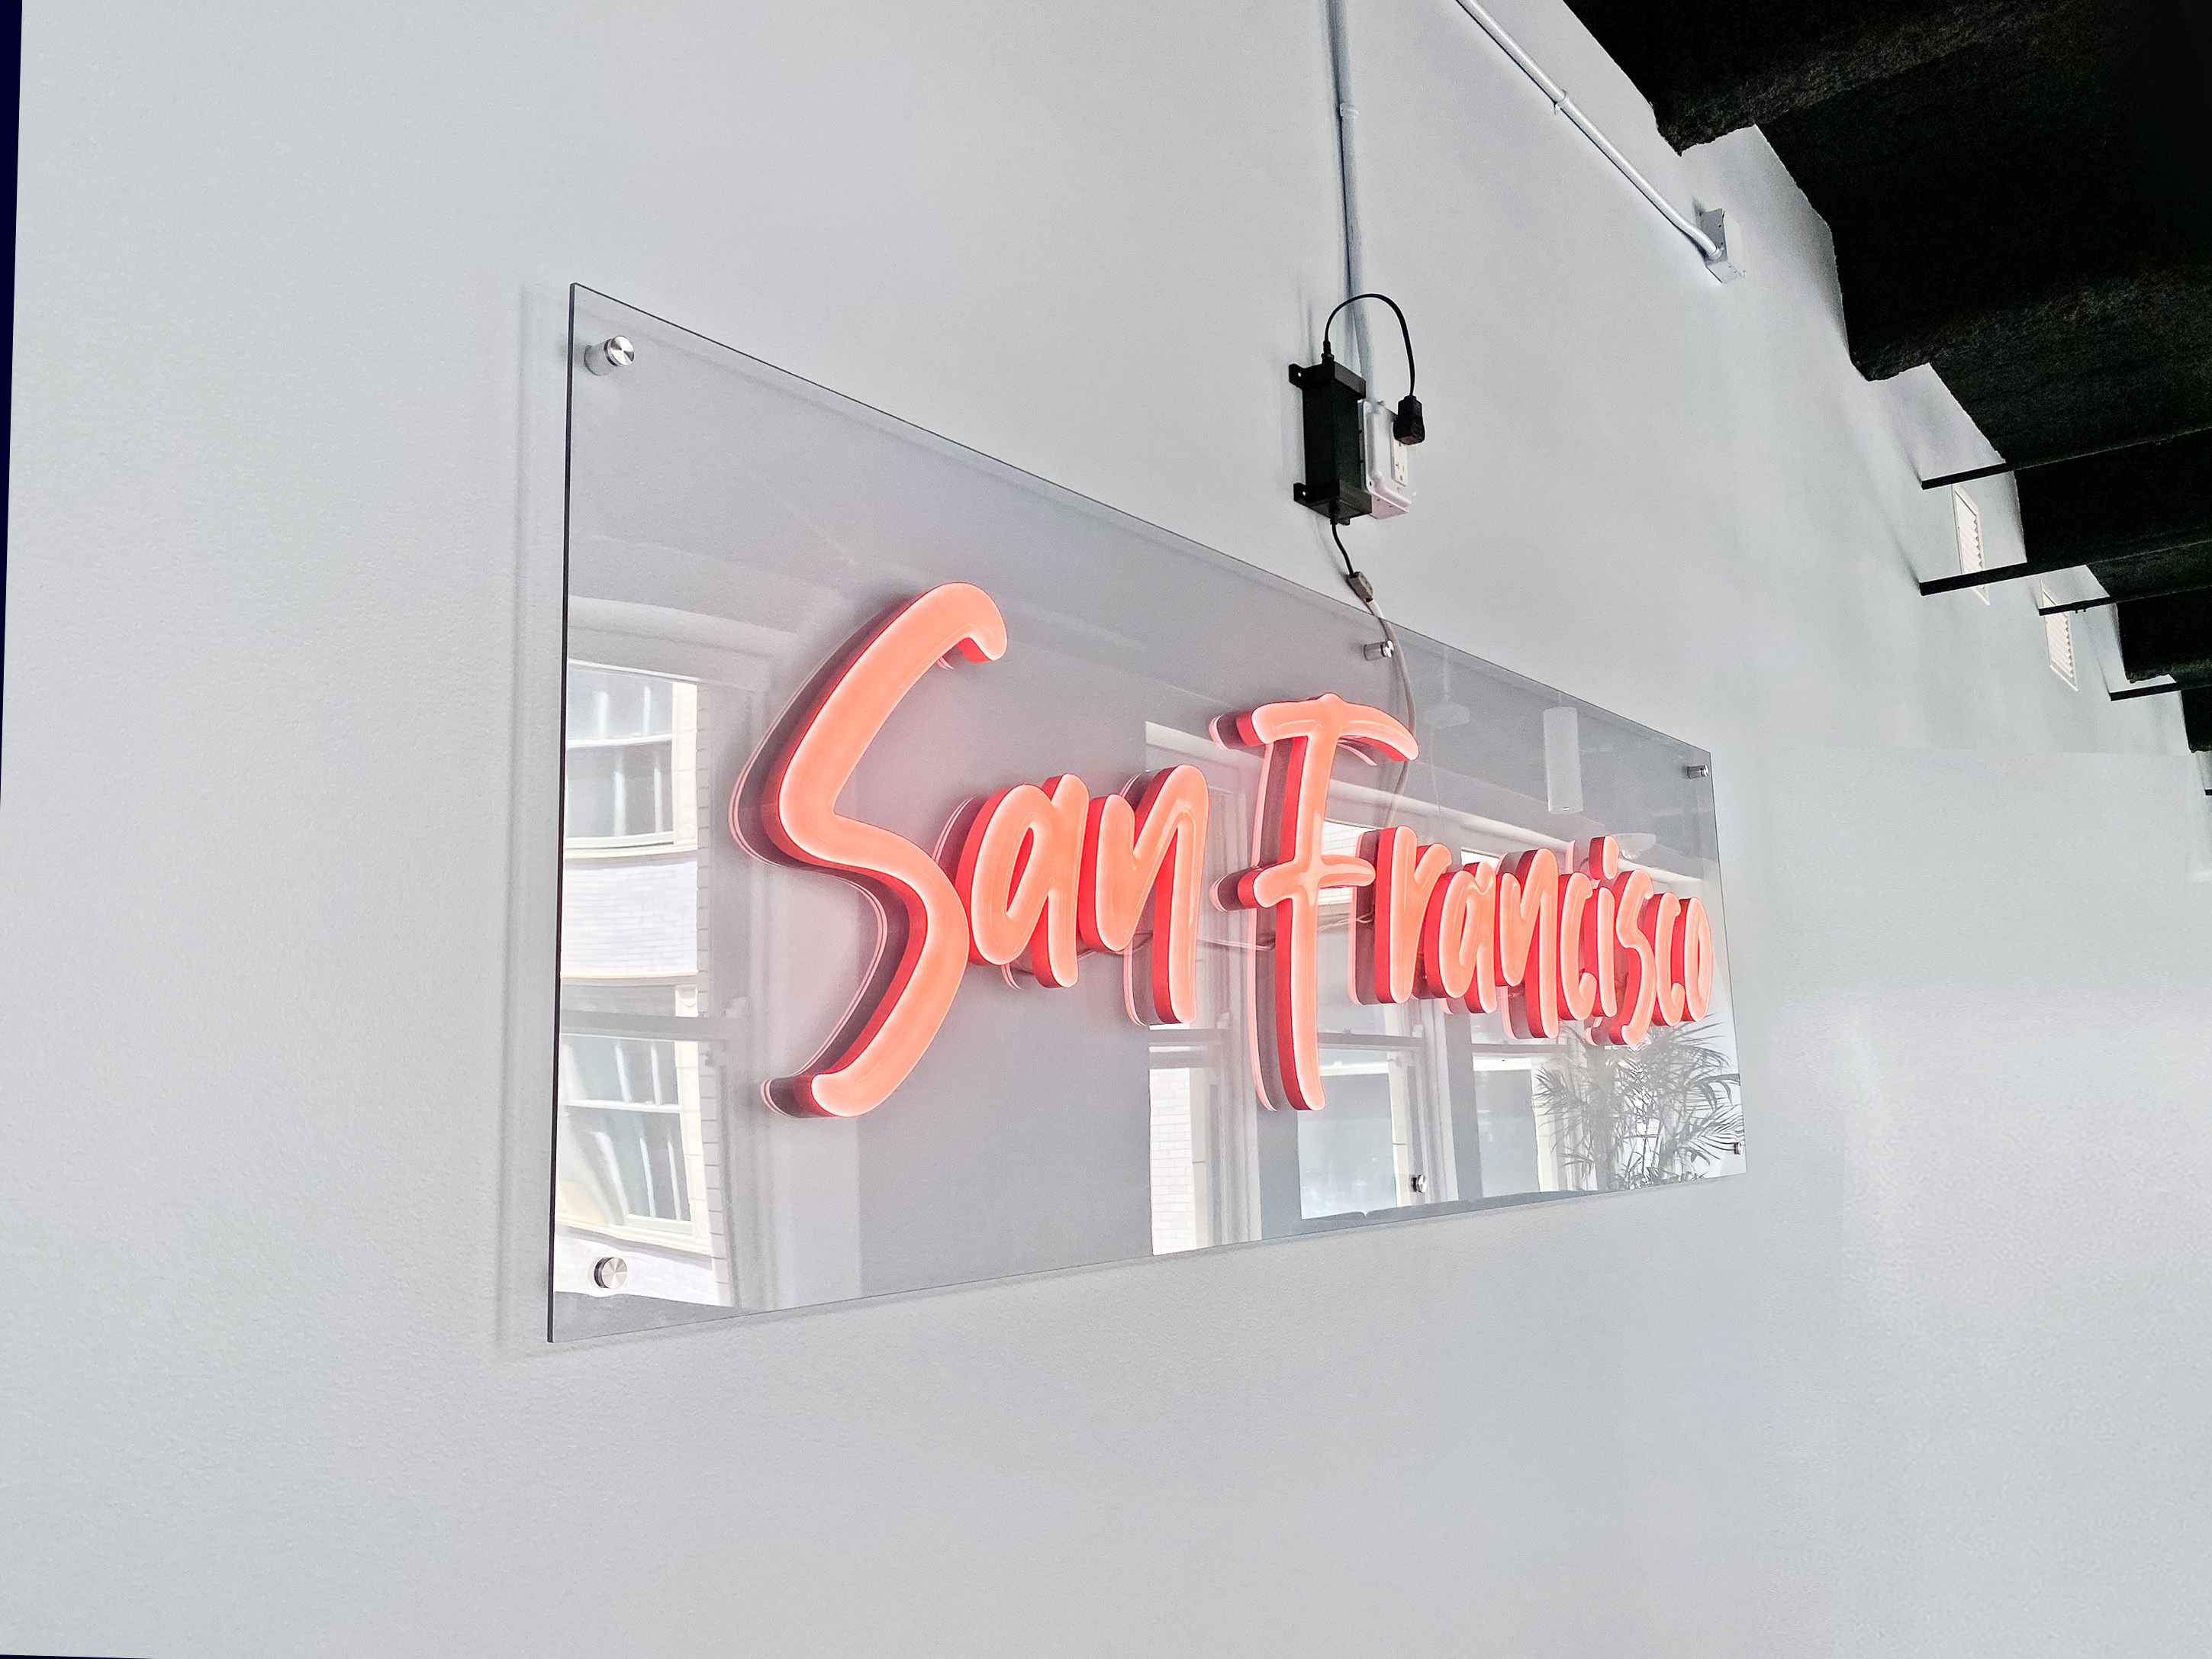 Pink script LED neon sign on clear backer for the San Francisco office of Meltwater, a software as a service company that develops and markets media monitoring and business intelligence software.